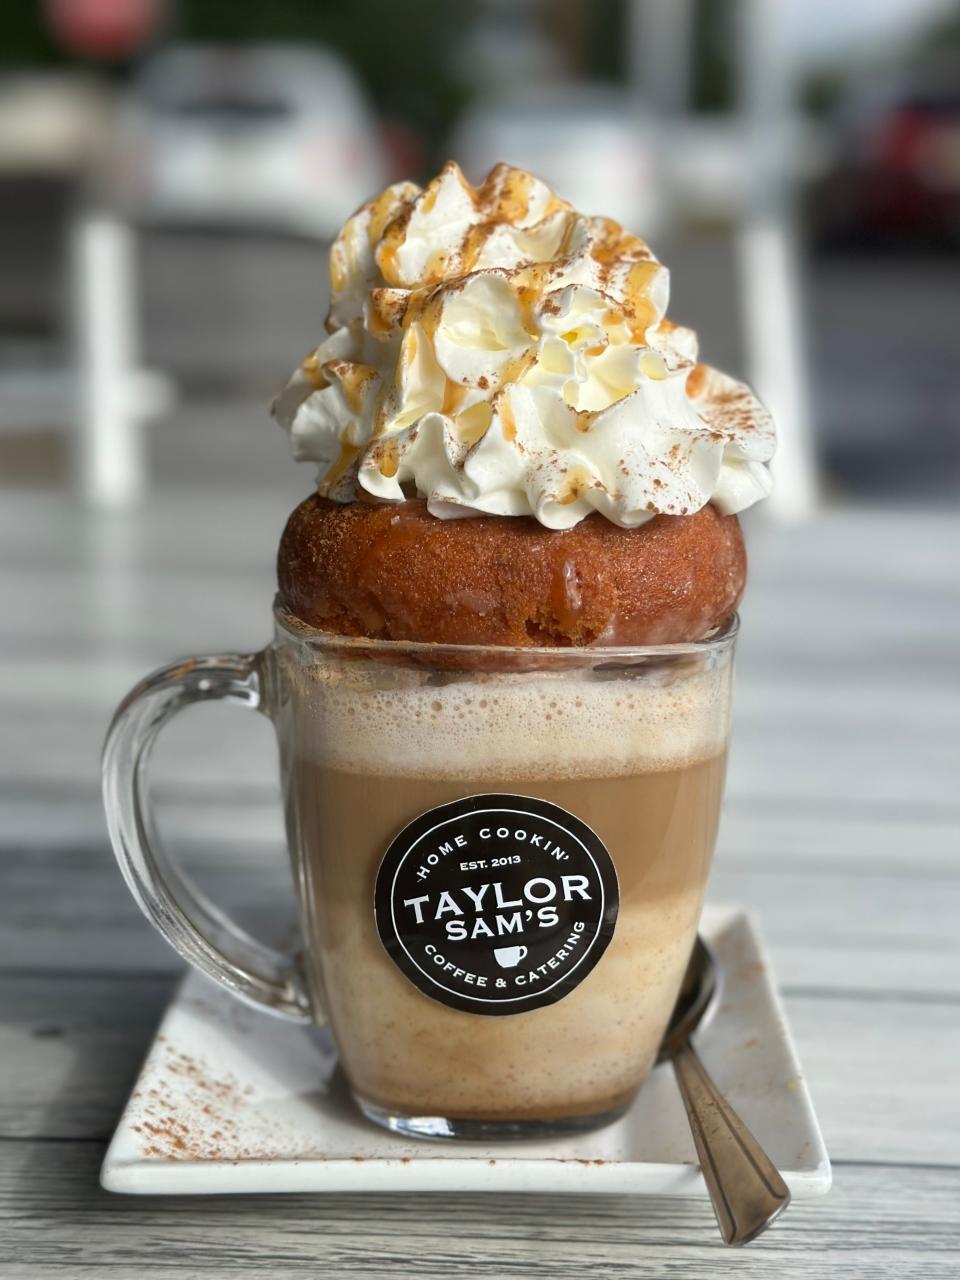 A Pumpkin Donut Latte with homemade pumpkin spice syrup, steamed milk and espresso, topped with a pumpkin donut, whipped cream, caramel and cinnamon, from Taylor Sam's in Brick.